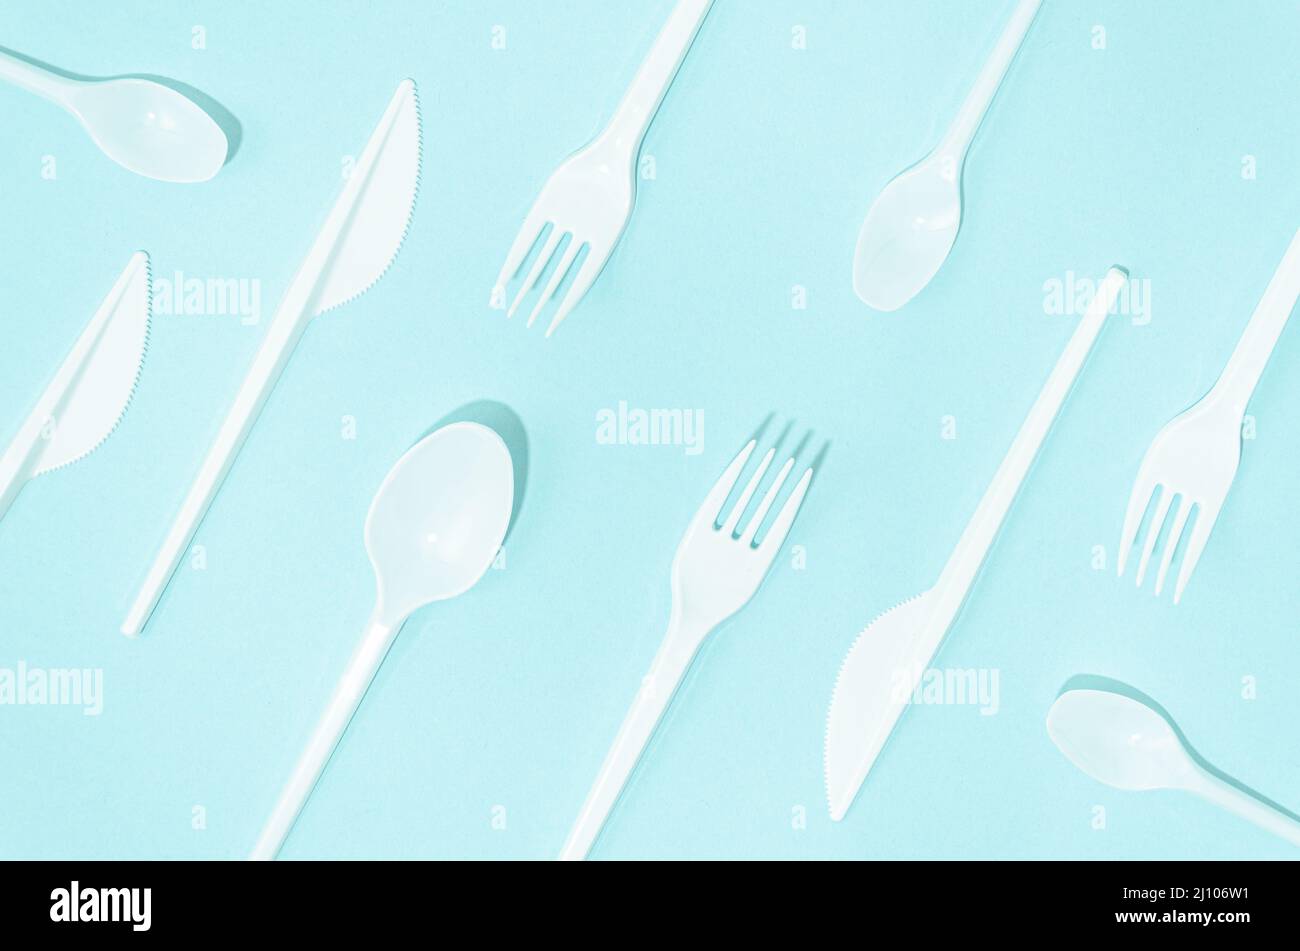 White disposable cutlery composition turquoise background Stock Photo